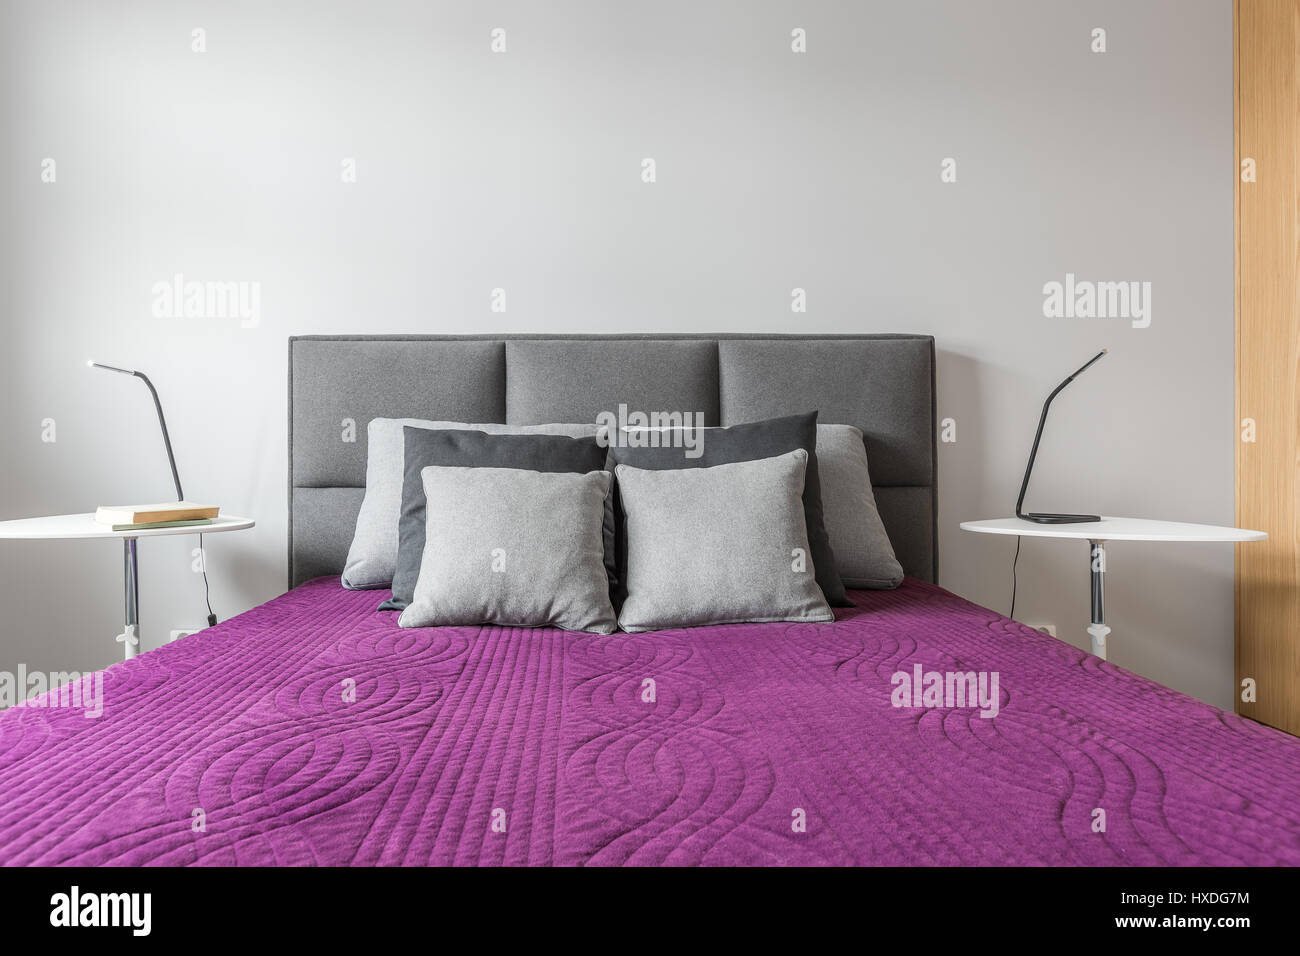 https://c8.alamy.com/comp/HXDG7M/big-bed-with-grey-decorative-pillows-and-purple-bedcover-in-modern-HXDG7M.jpg